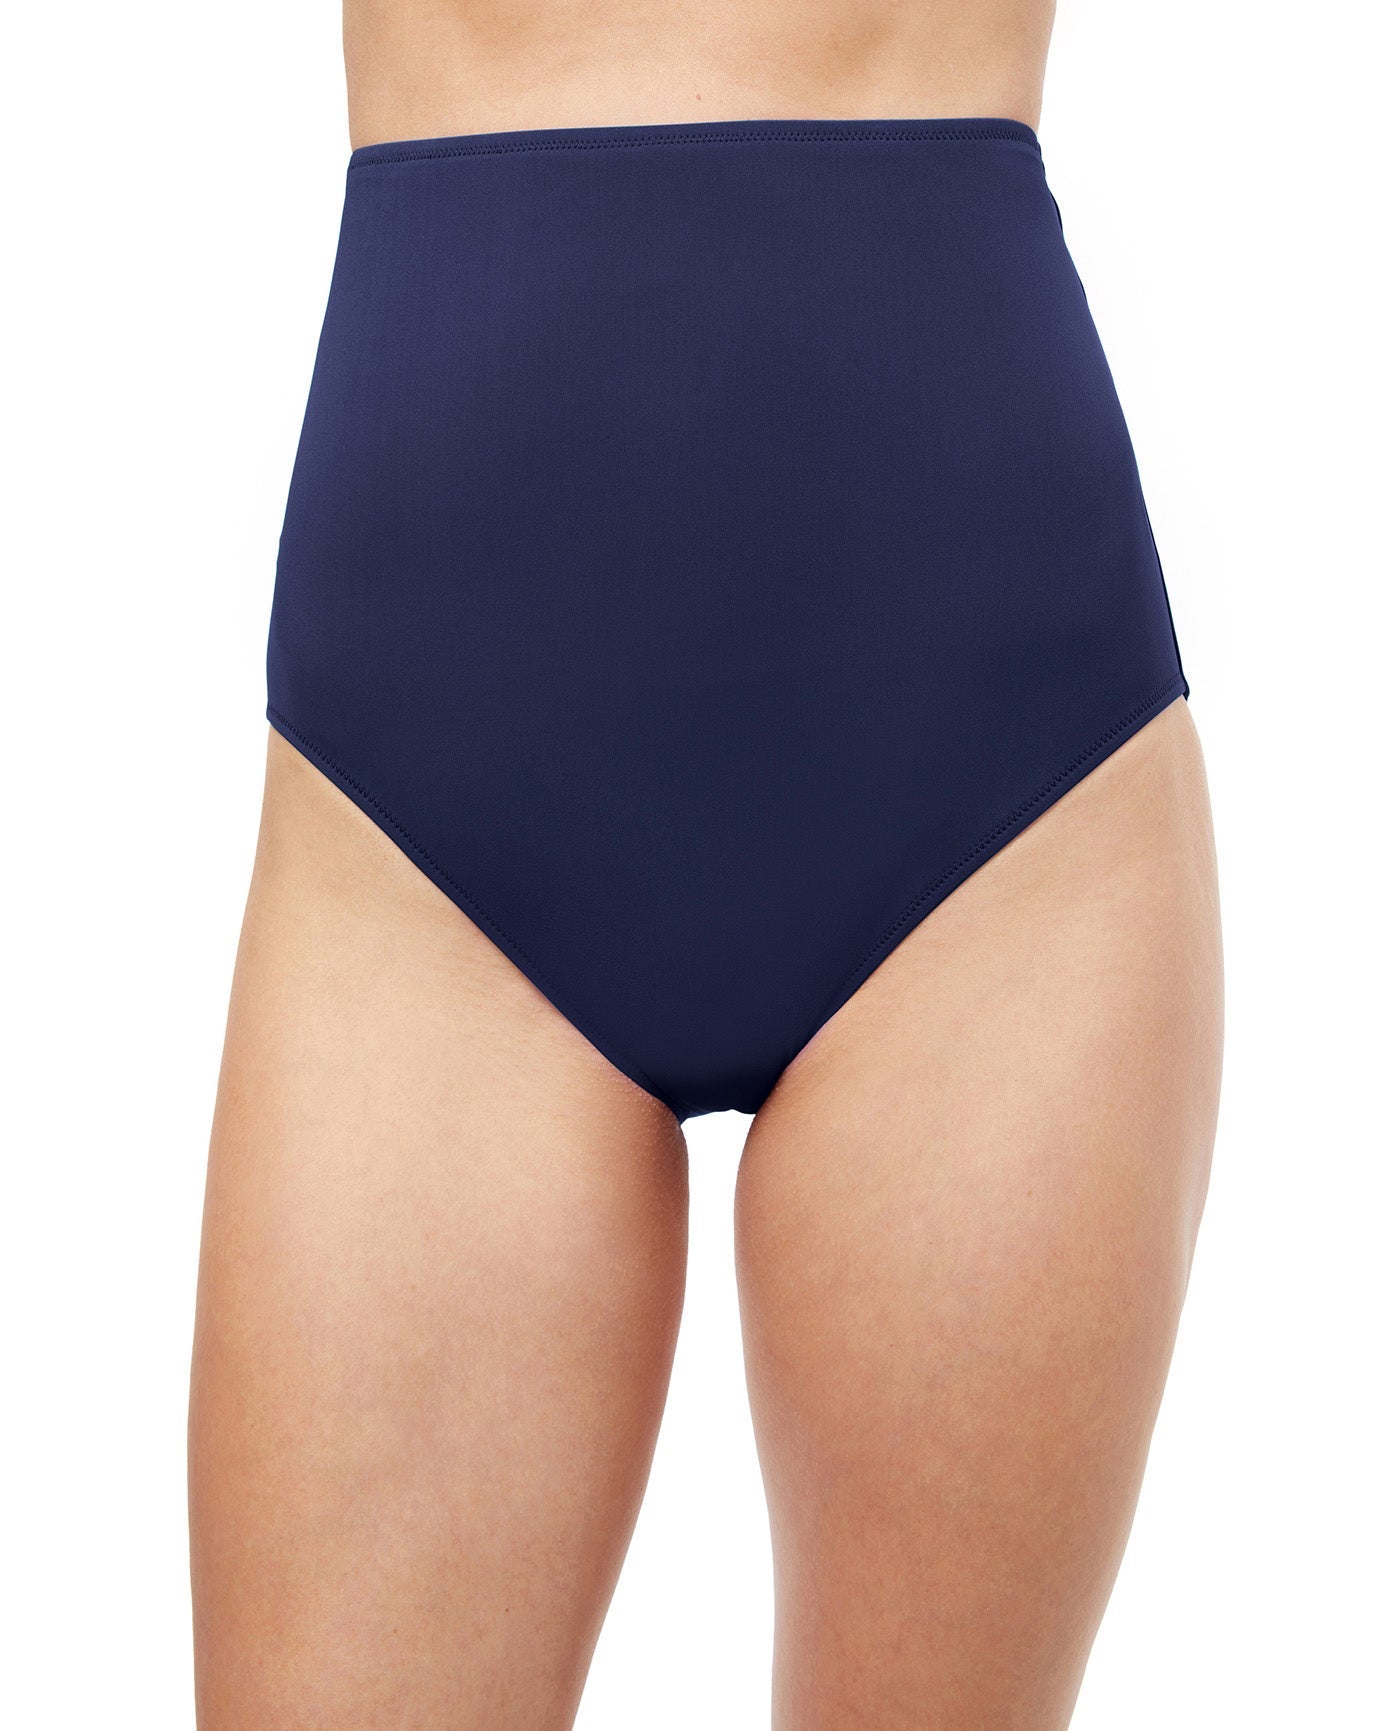 Profile by Gottex Women's Ruched Super High Waist Swimsuit Bottom